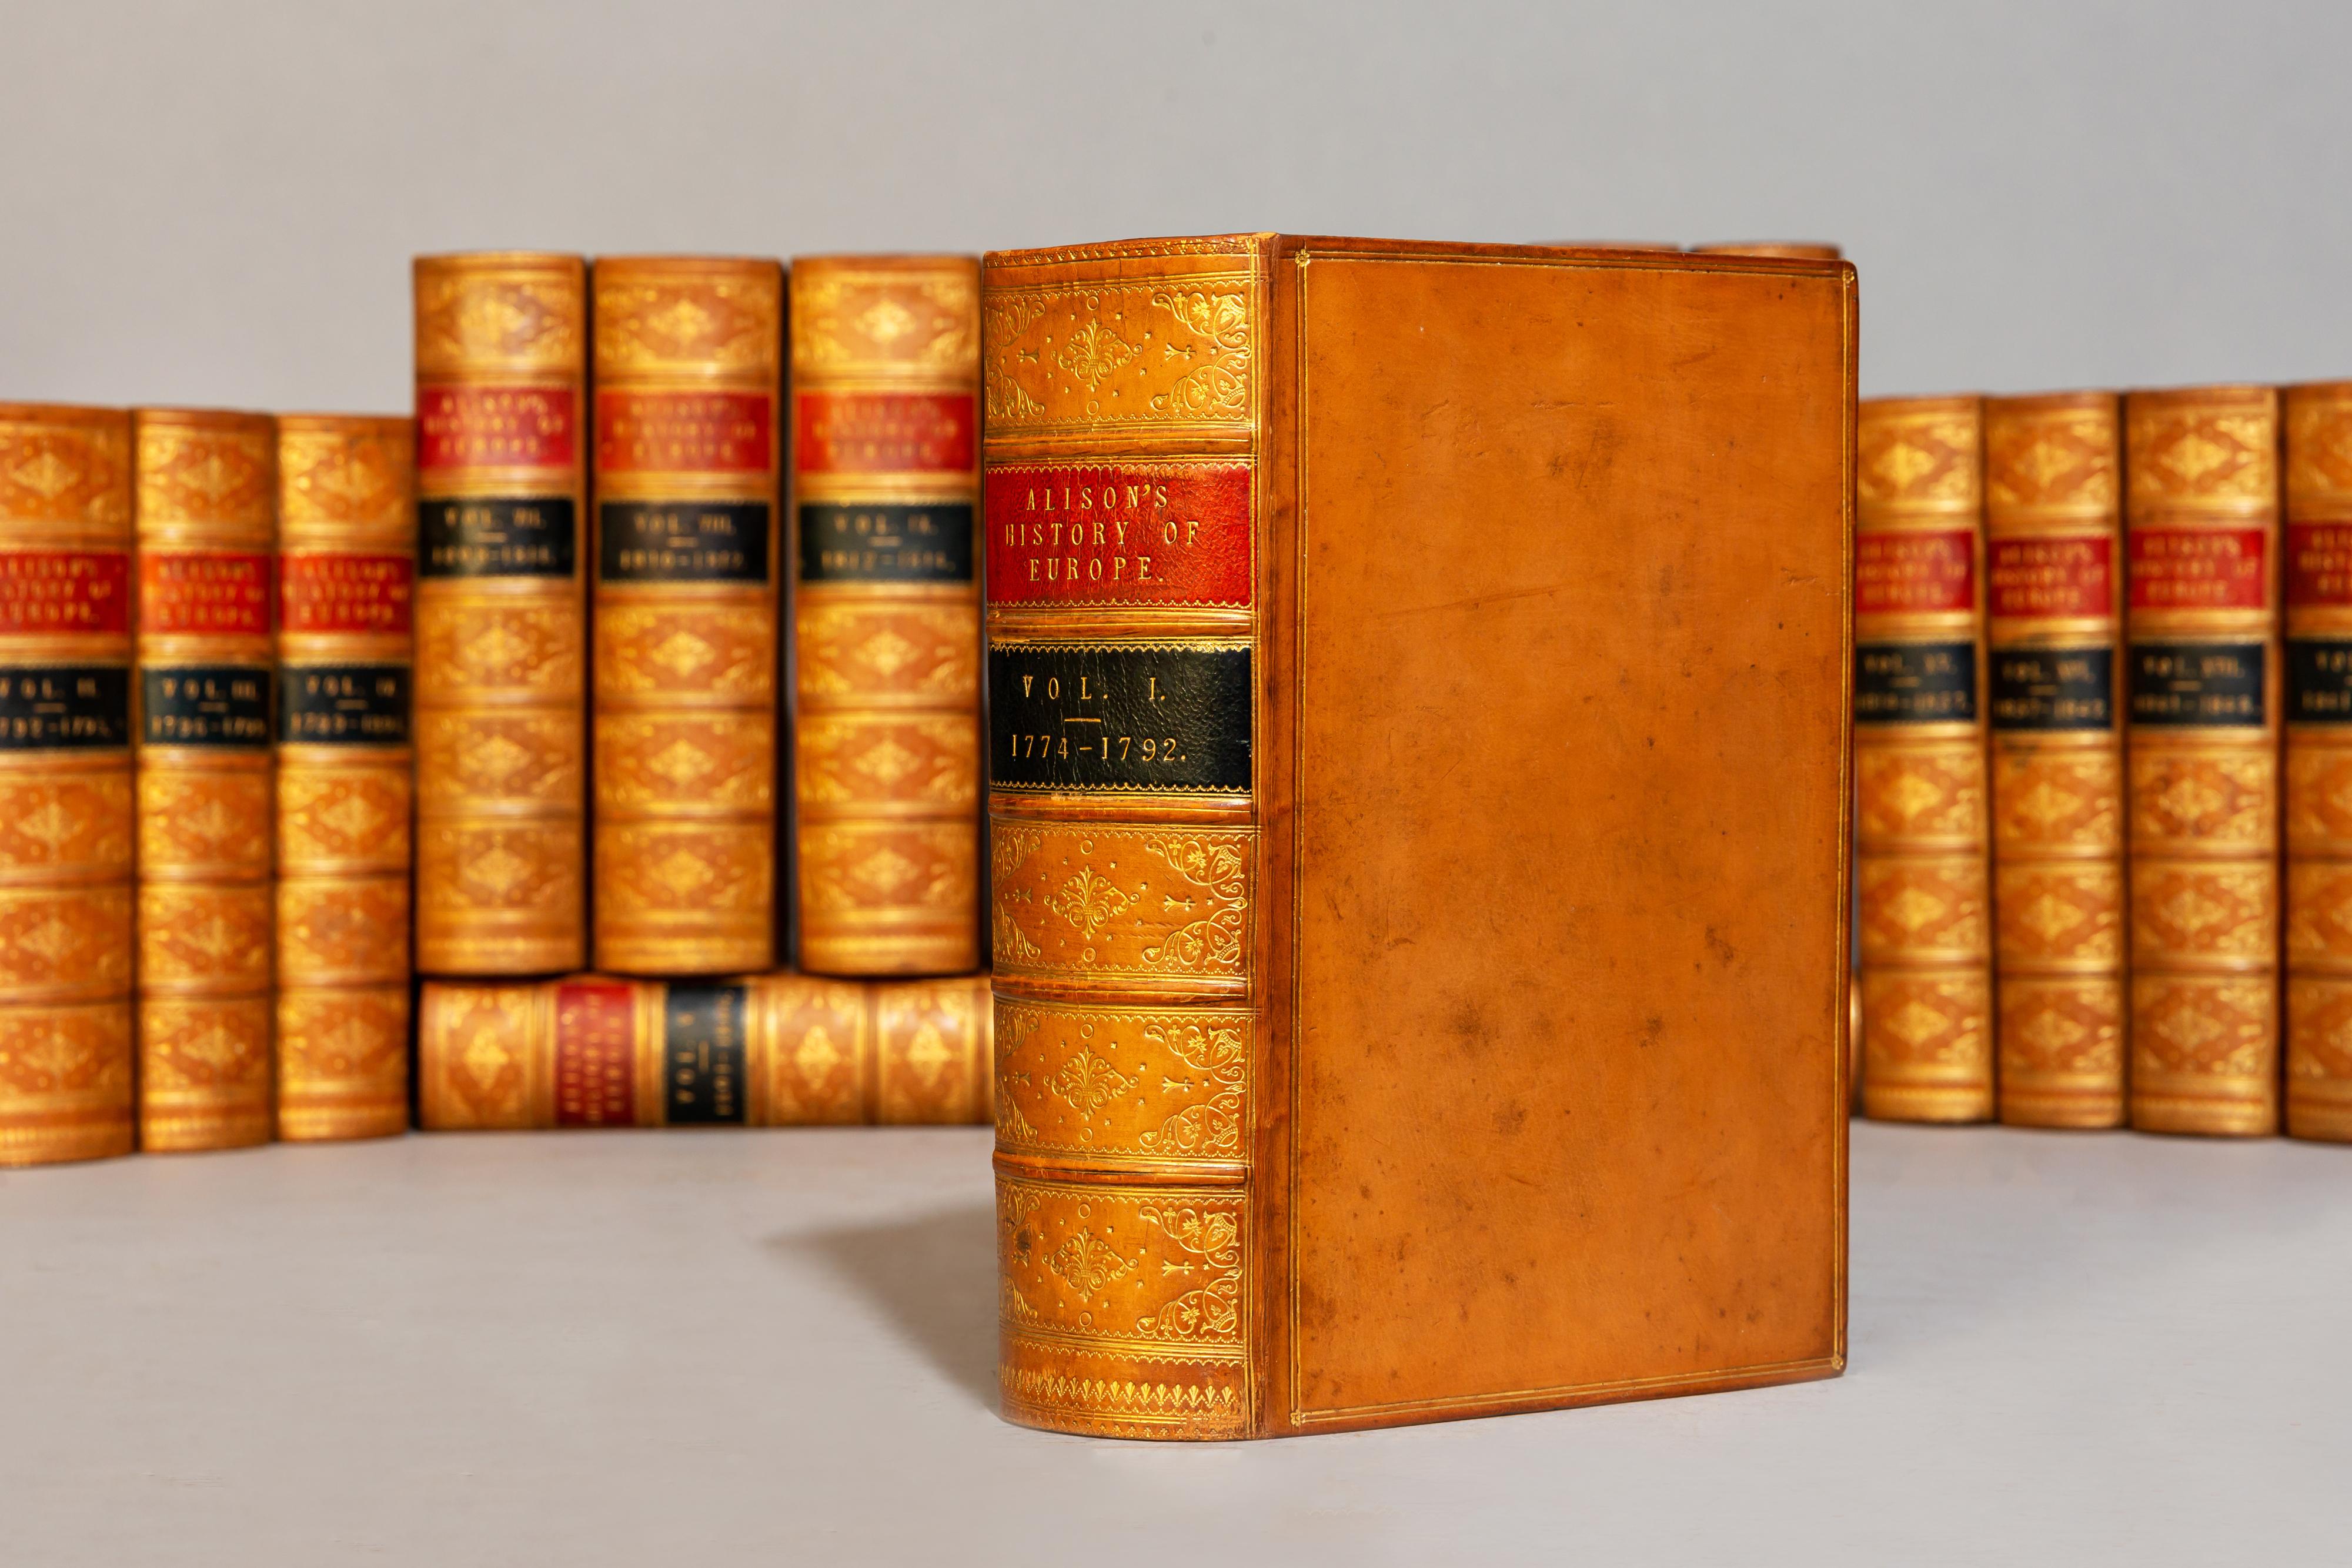 19 volumes

From The Commencement Of The French Revolution.
Bound in full tan polished calf by W.J. Mansell, marbled edges, raised bands, ornate gilt on spines, labels. 

Published: Edinburgh & London: William Blackwood & Sons 1843-59.